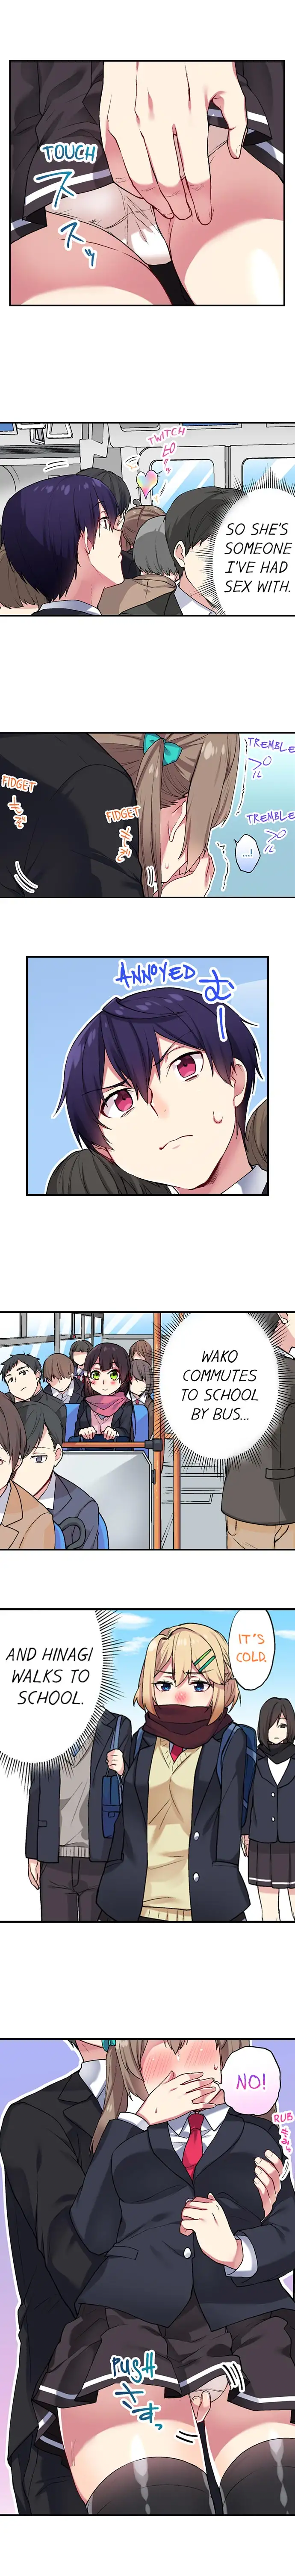 Committee Chairman, Didn’t You Just Masturbate In the Bathroom? I Can See the Number of Times People Orgasm - Chapter 34 Page 4